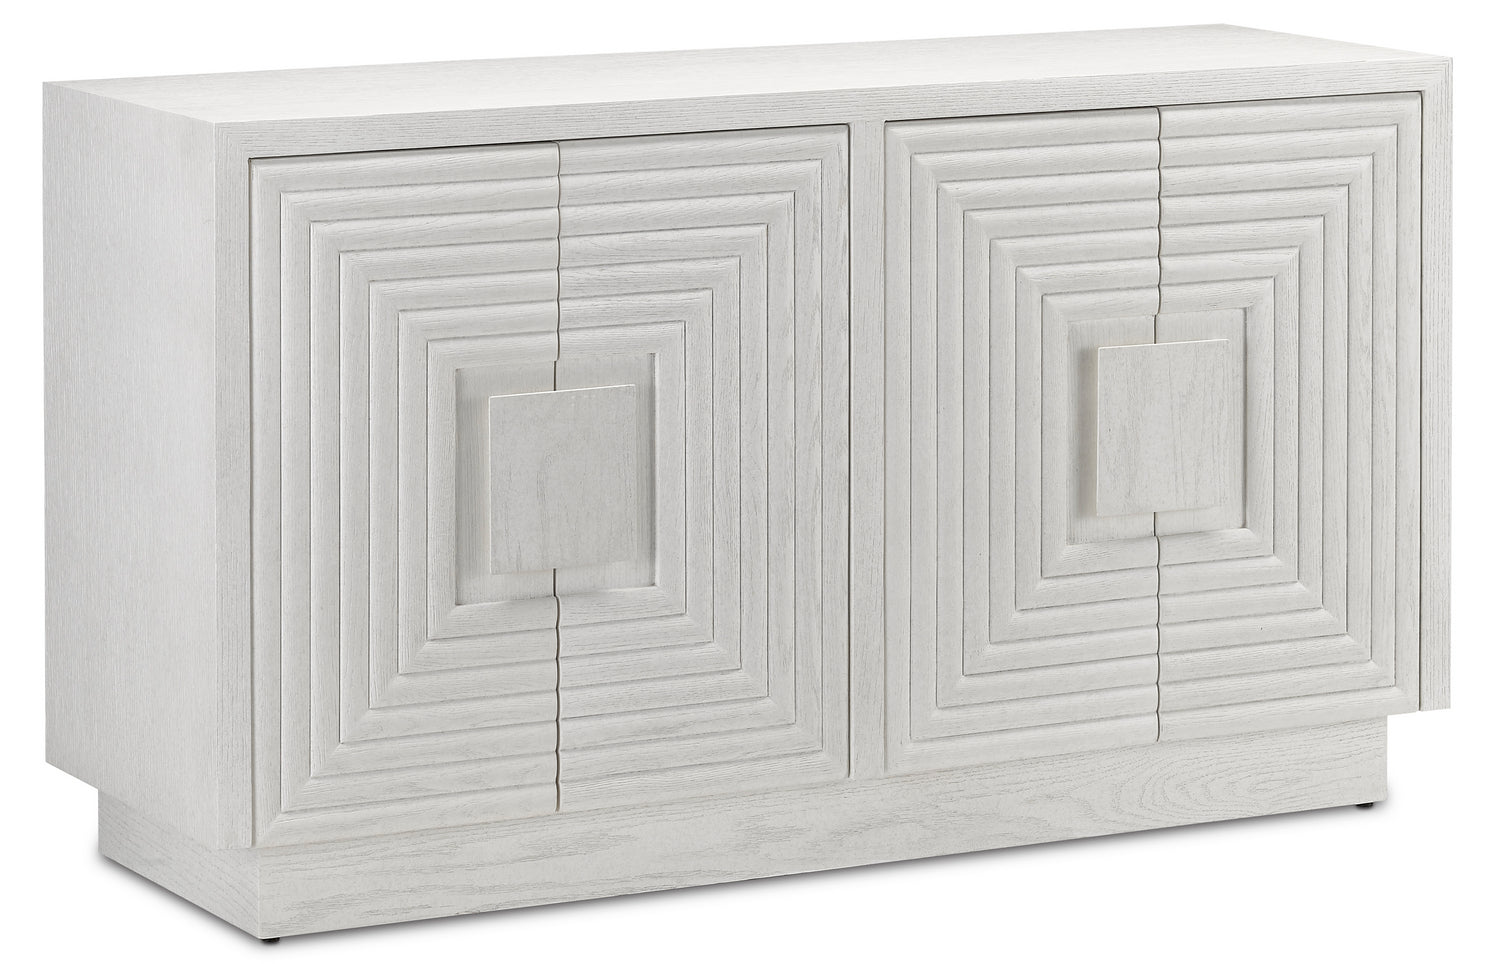 Cabinet from the Morombe collection in Cerused White finish